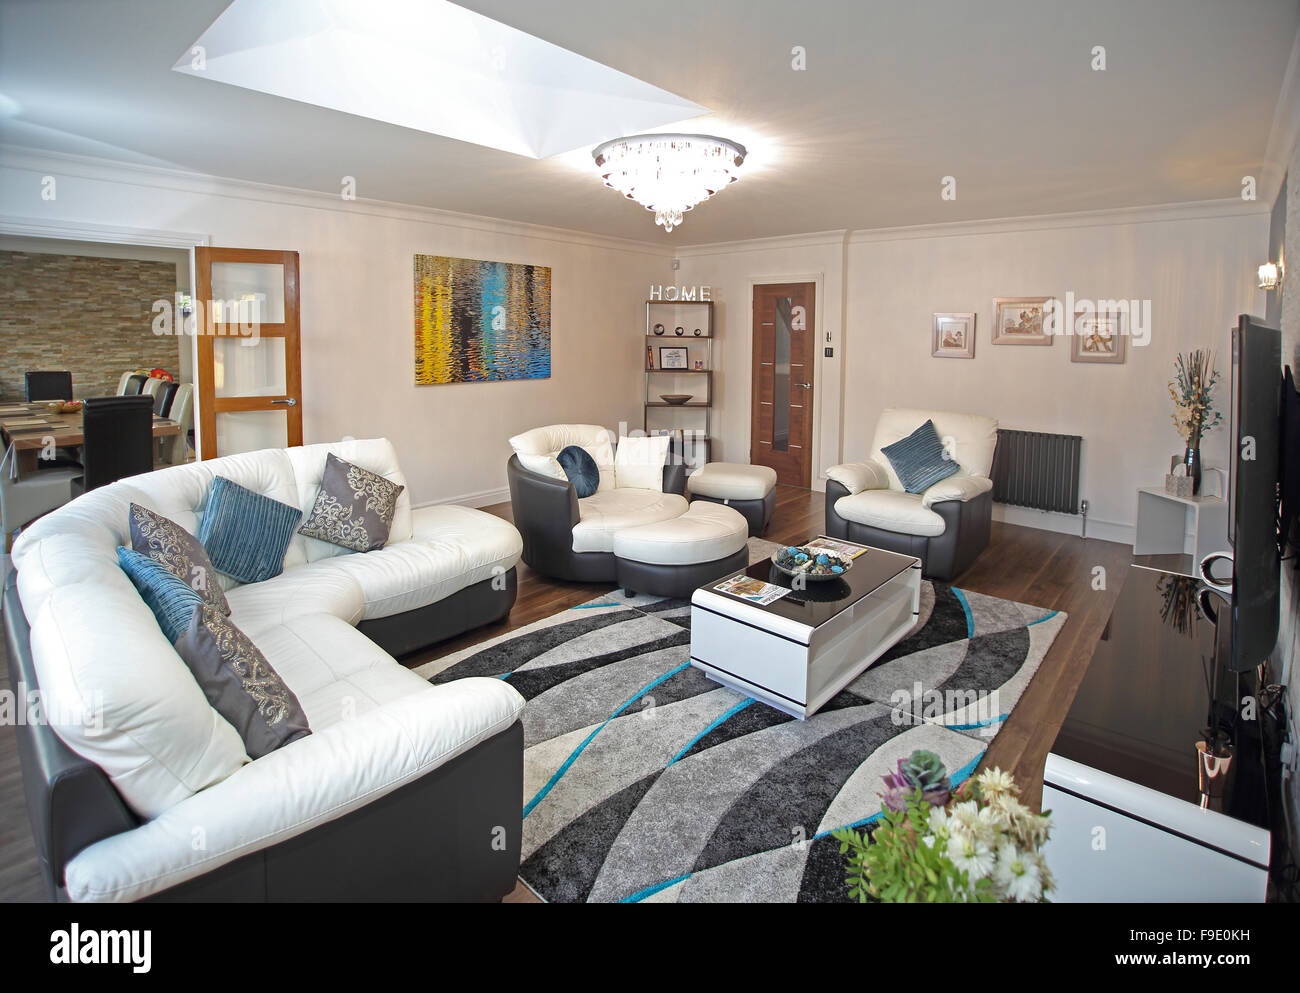 The living room of a newly refurbished house with two-tone leather sofas and double doors to dining room Stock Photo